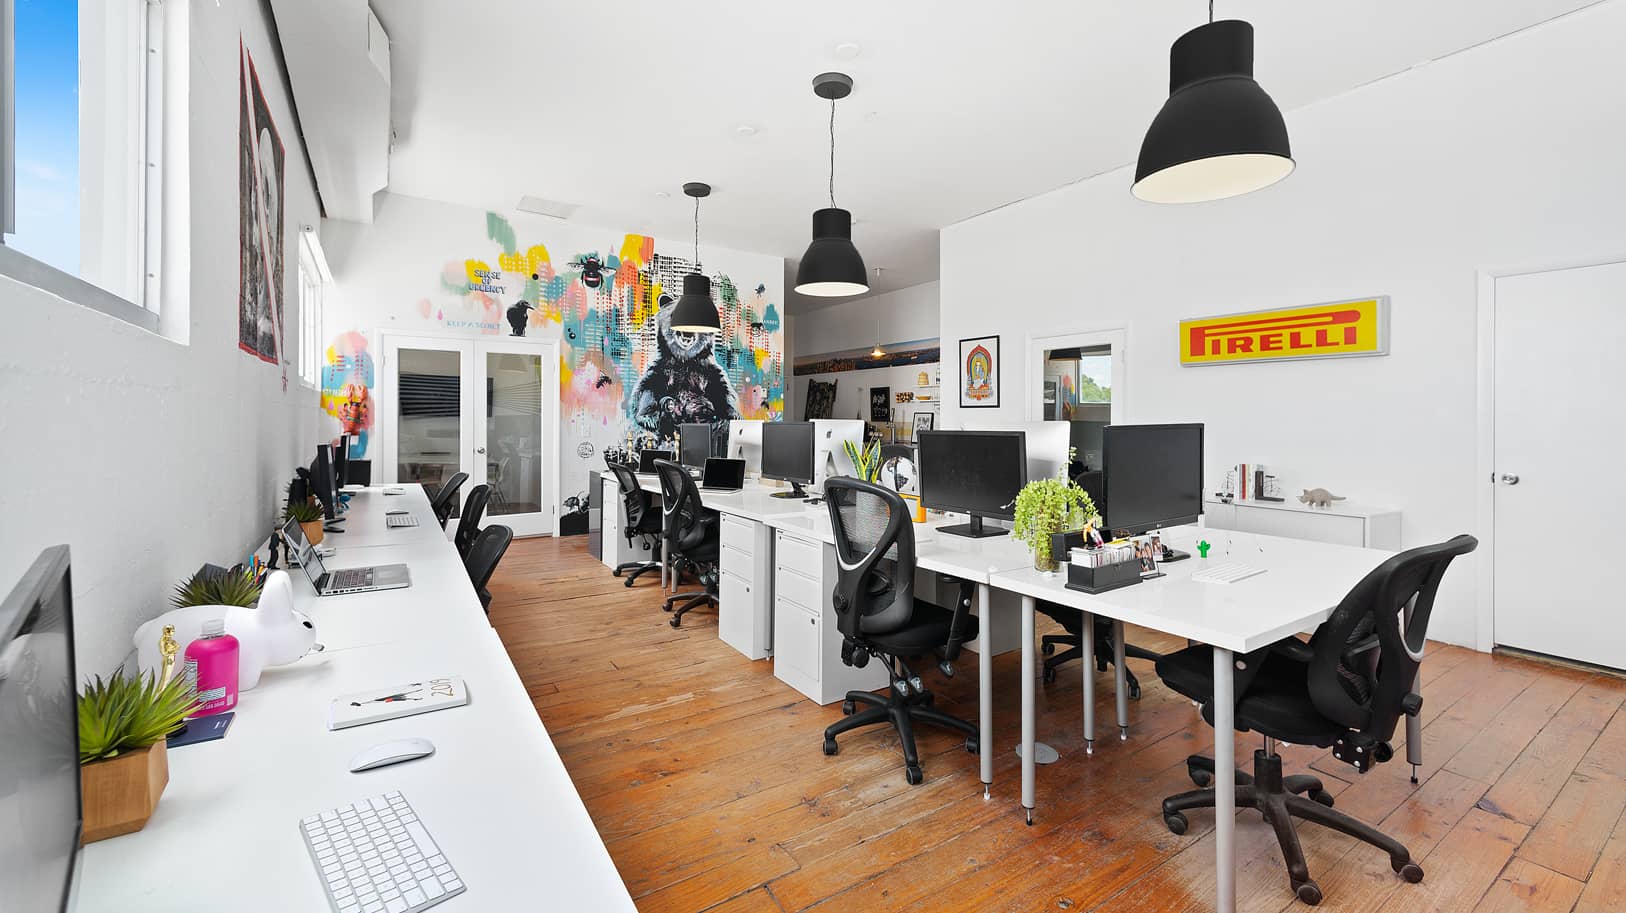 Workstations area at artistic-looking studio office | Think Twice studio